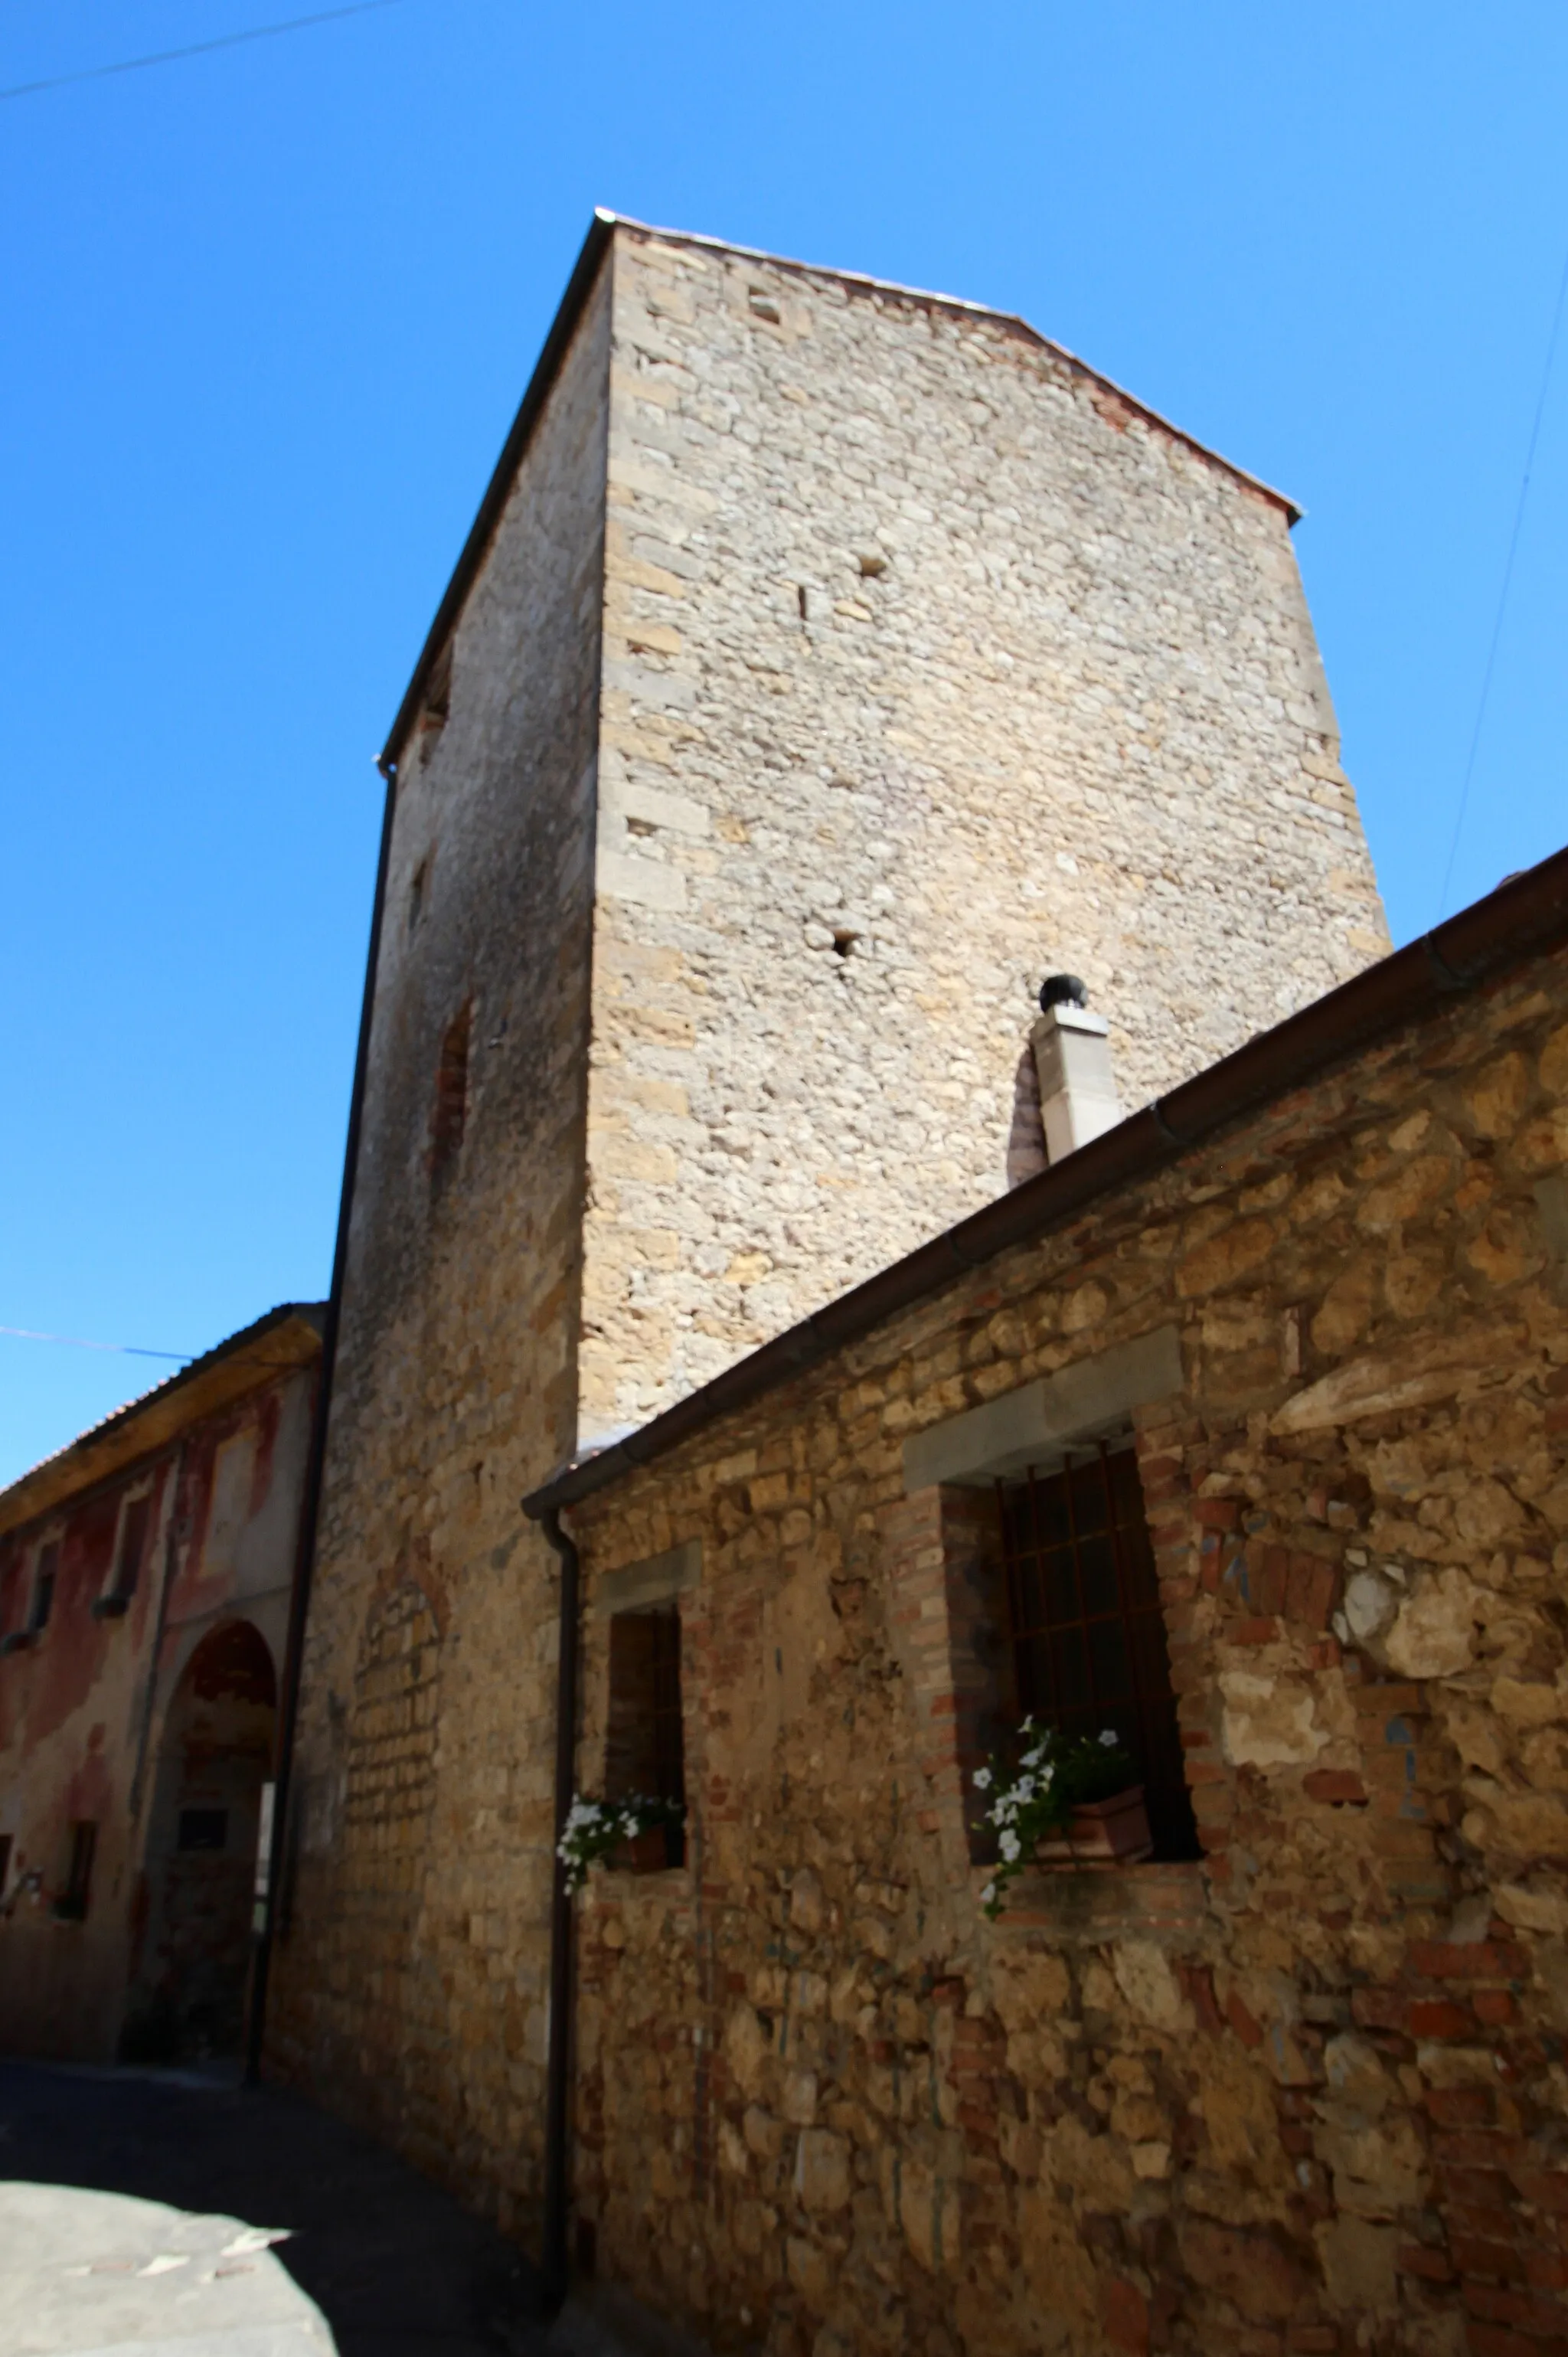 Photo showing: Medieval tower (Torre medievale), Ceppato, hamlet of Casciana Terme Lari, Province of Pisa, Tuscany, Italy